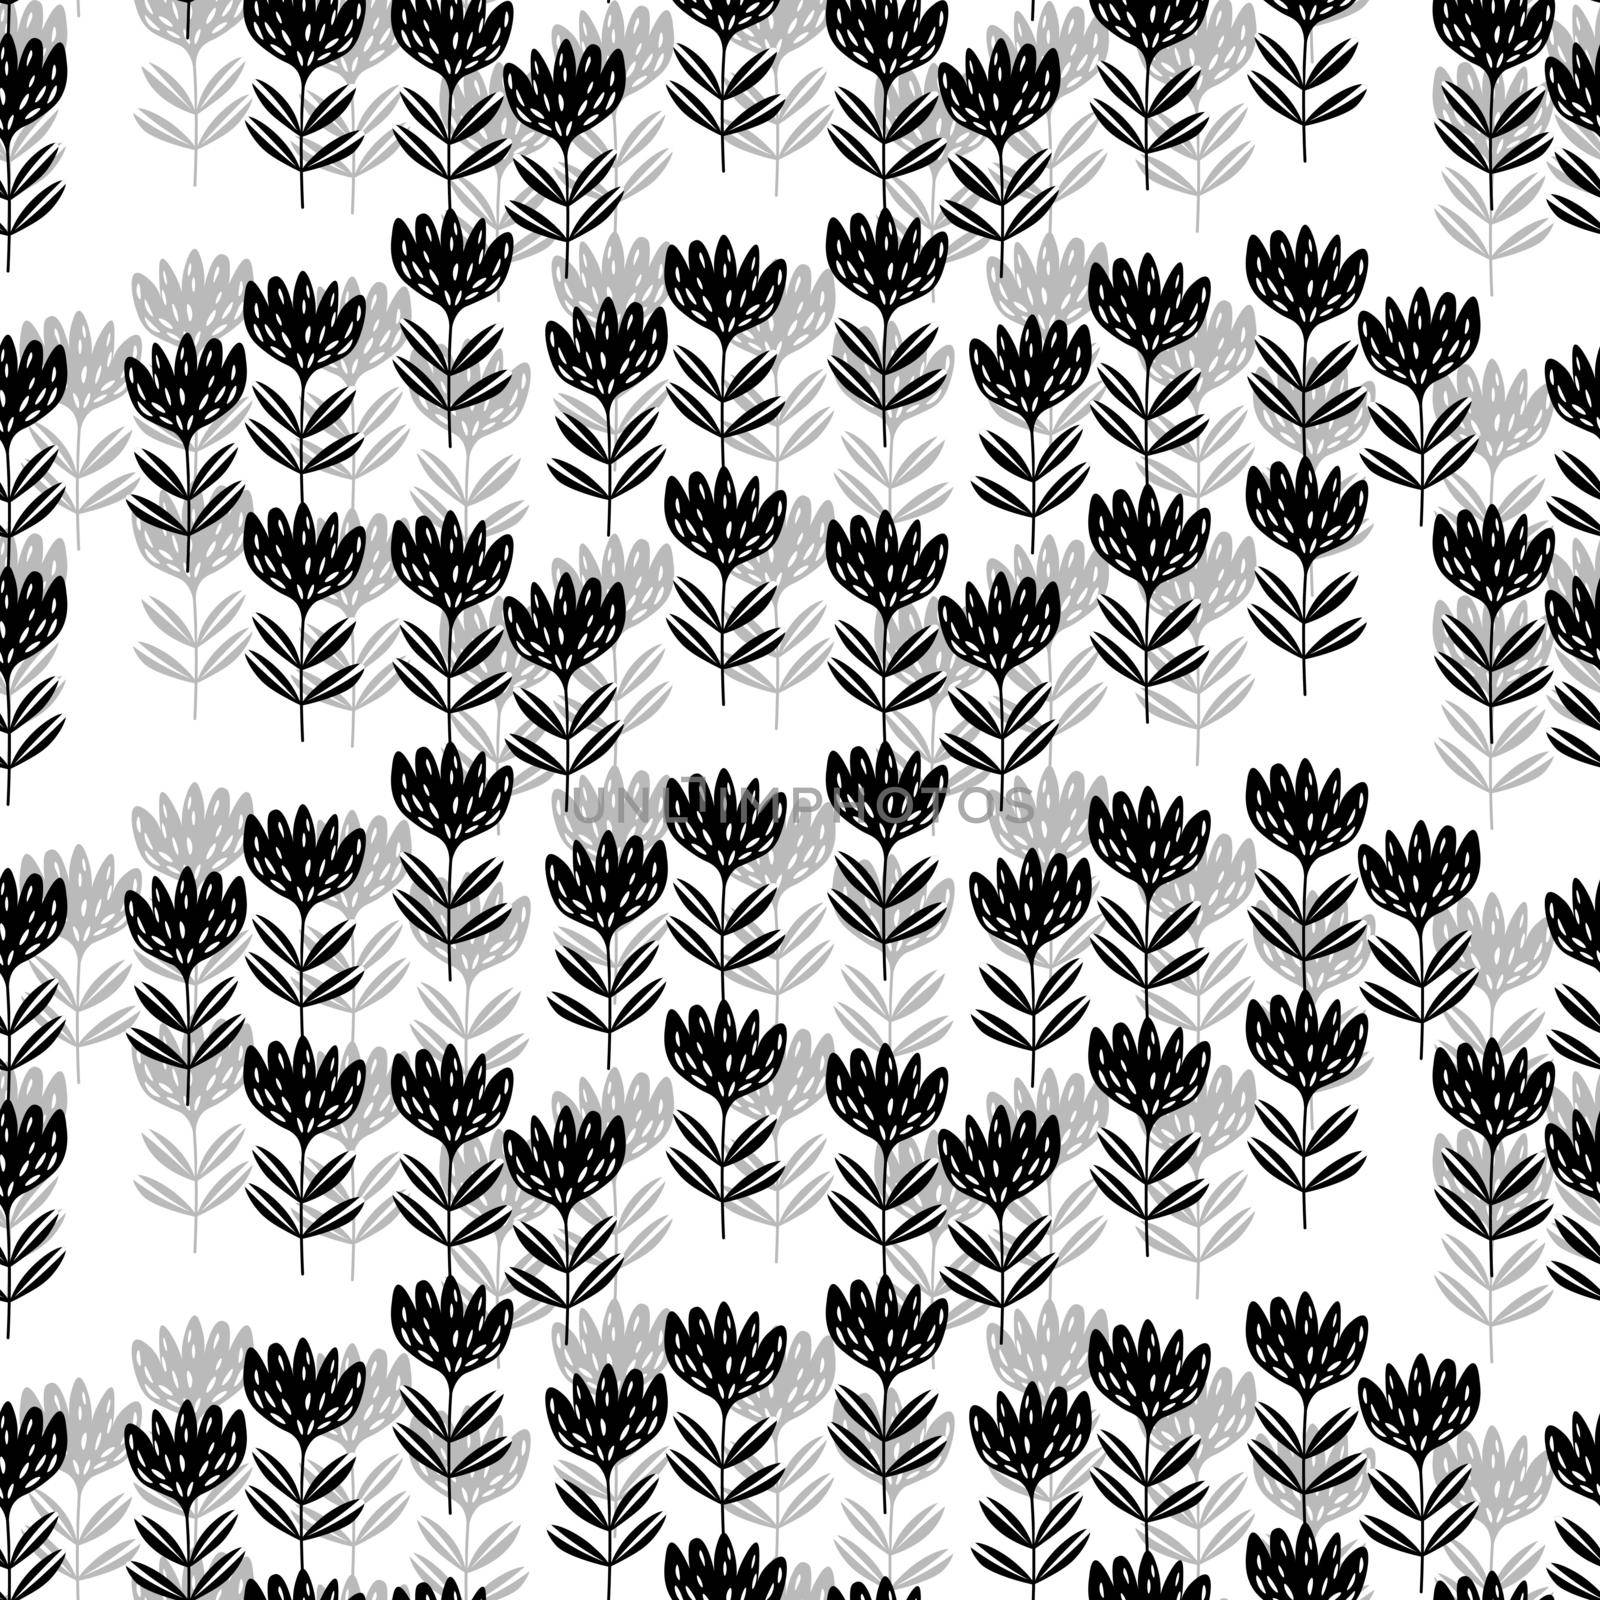 Seamless floral pattern based on traditional folk art ornaments. Black flowers on white background. Scandinavian style. Sweden nordic style. Vector illustration for fabric, textile, wallpaper. by allaku